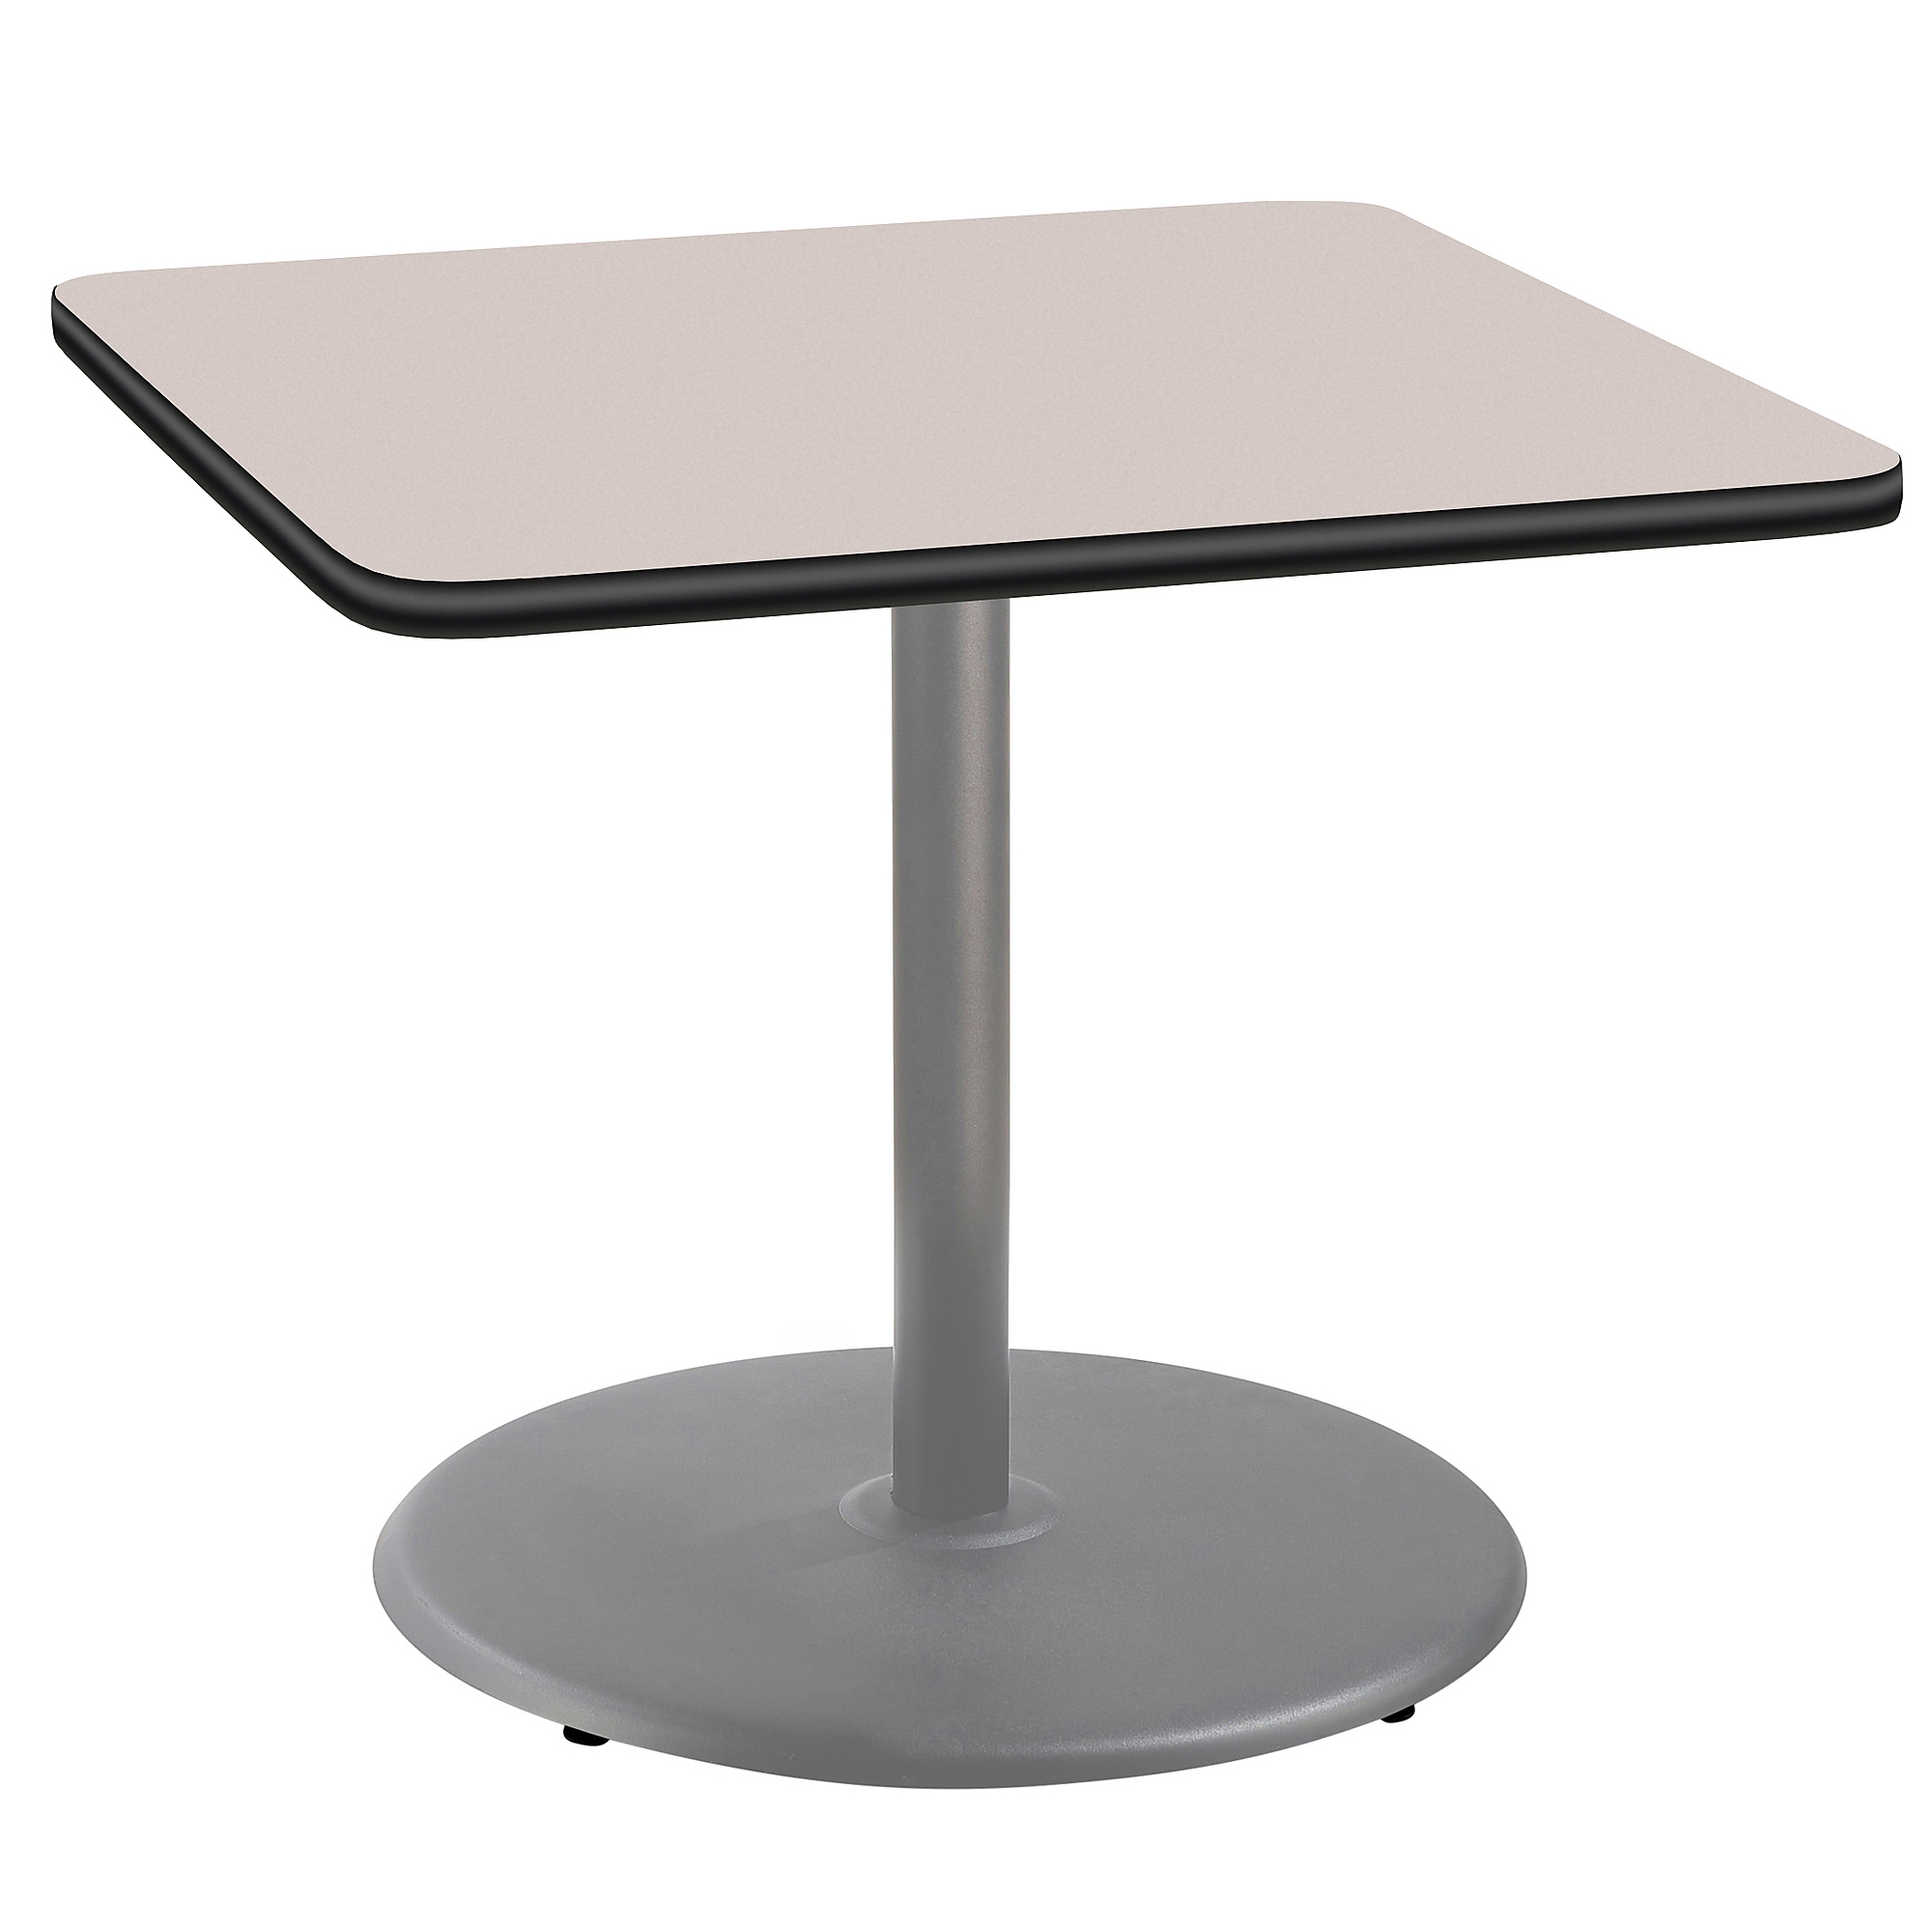 "National Public Seating, Cafe Table, 36x36x30 Square ""R"" Base, Height 30 in, Model CTG33636RDPBTMGY"